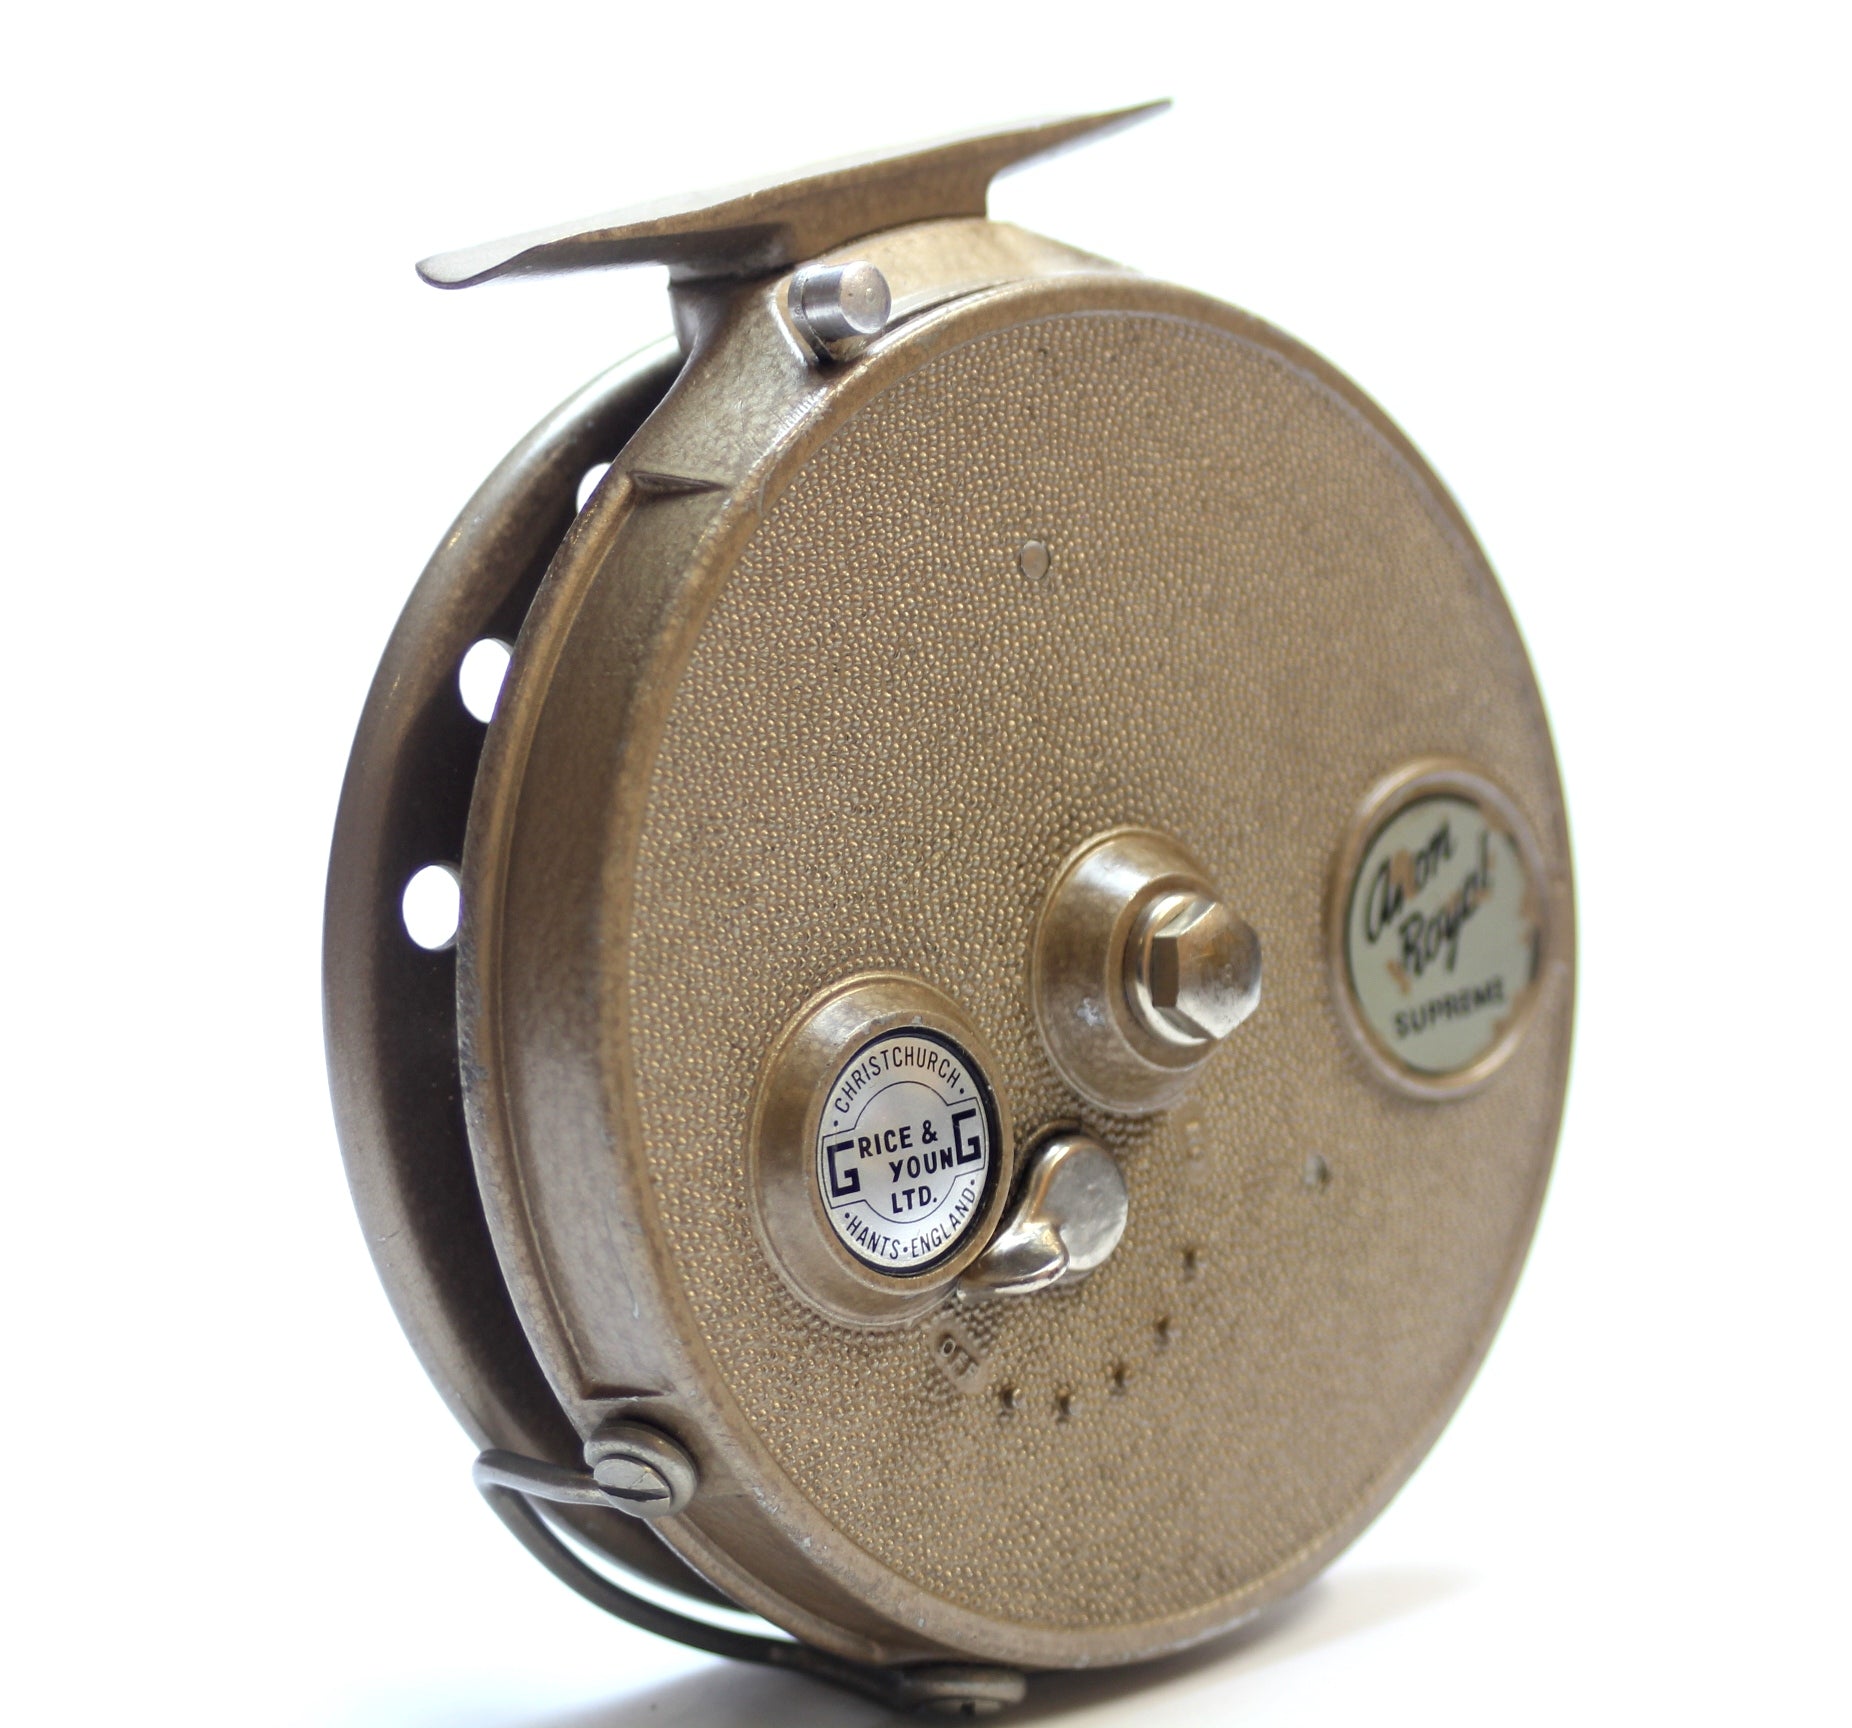 Christchurch Grice & Young Ltd, Avon Royal Supreme Reel – Ireland's Antique  Fishing Tackle